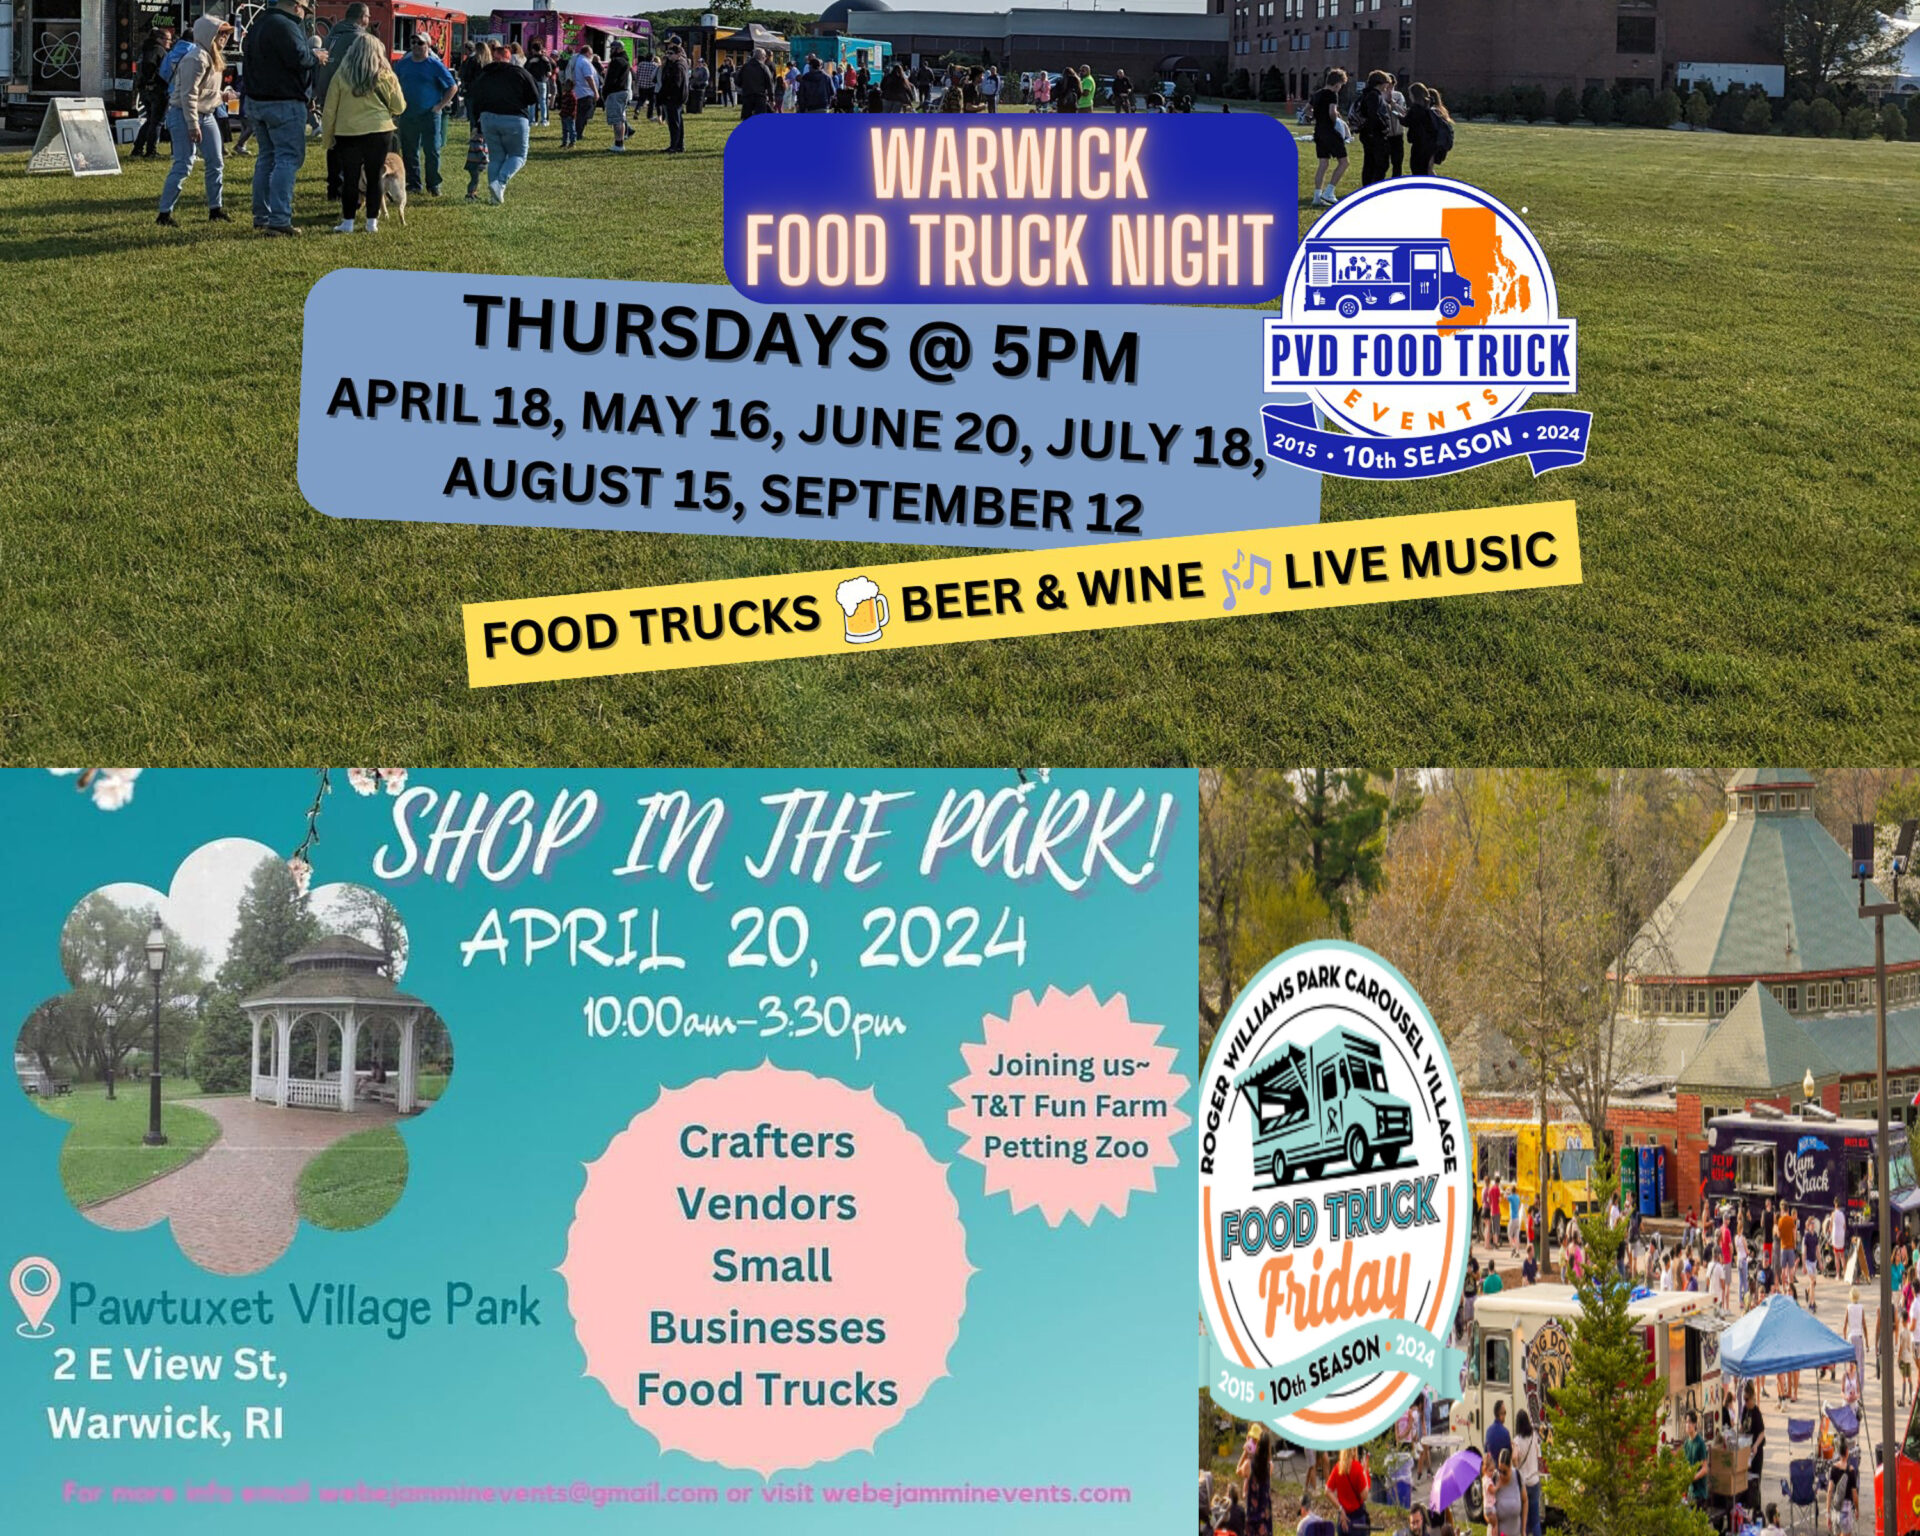 [CREDIT: Warwick Post] Warwick weekend events include the return of food truck events, and a Pawtuxet Village shopping festival.